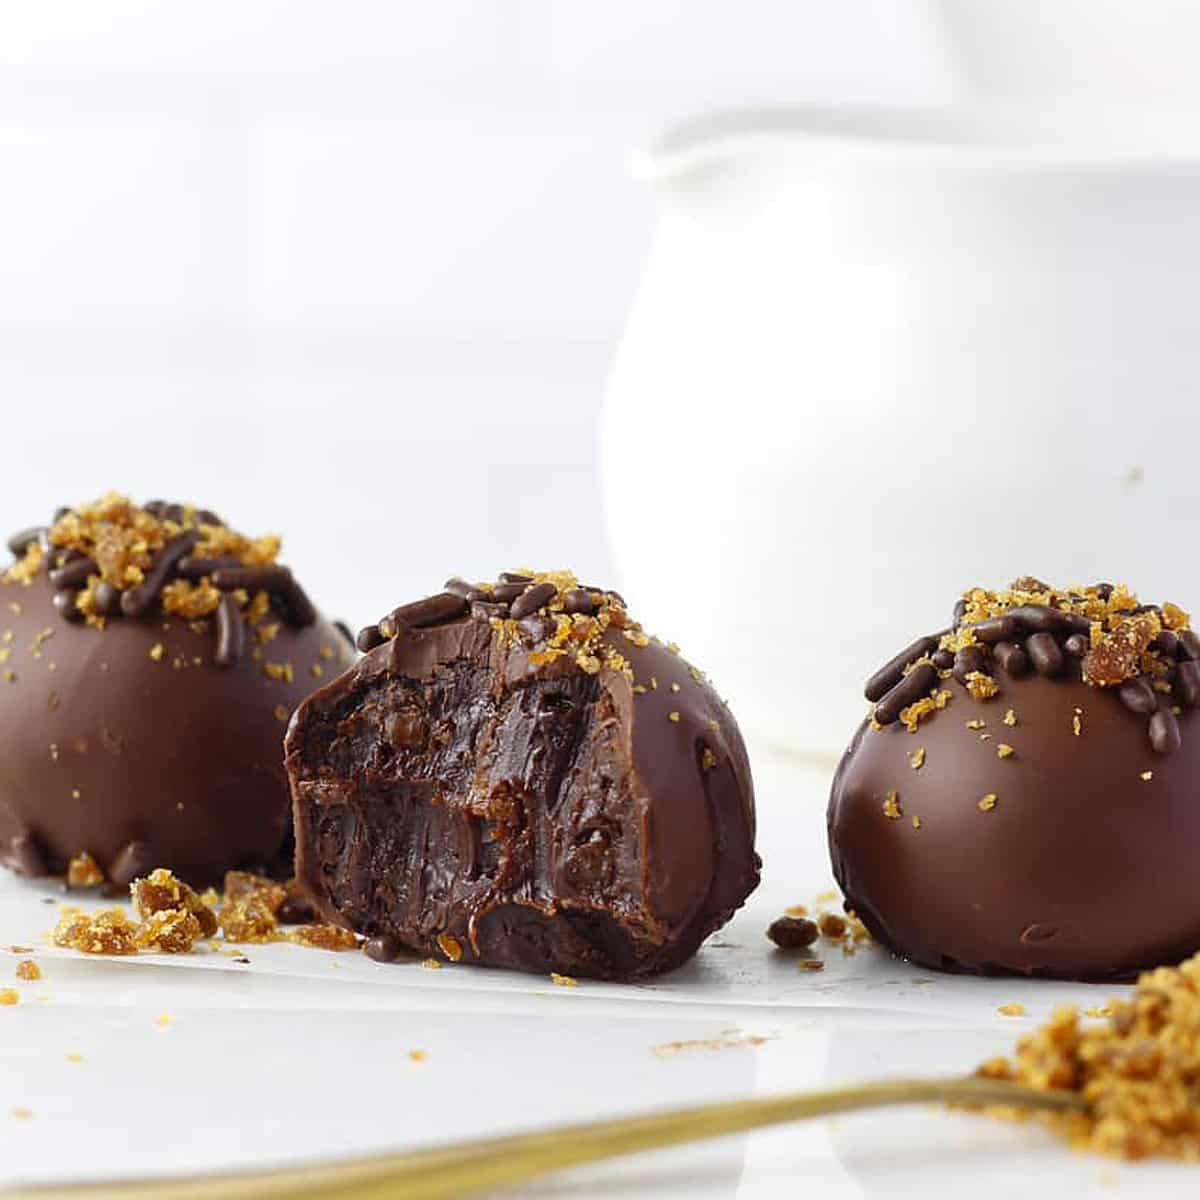 a chocolate praline with a bite out